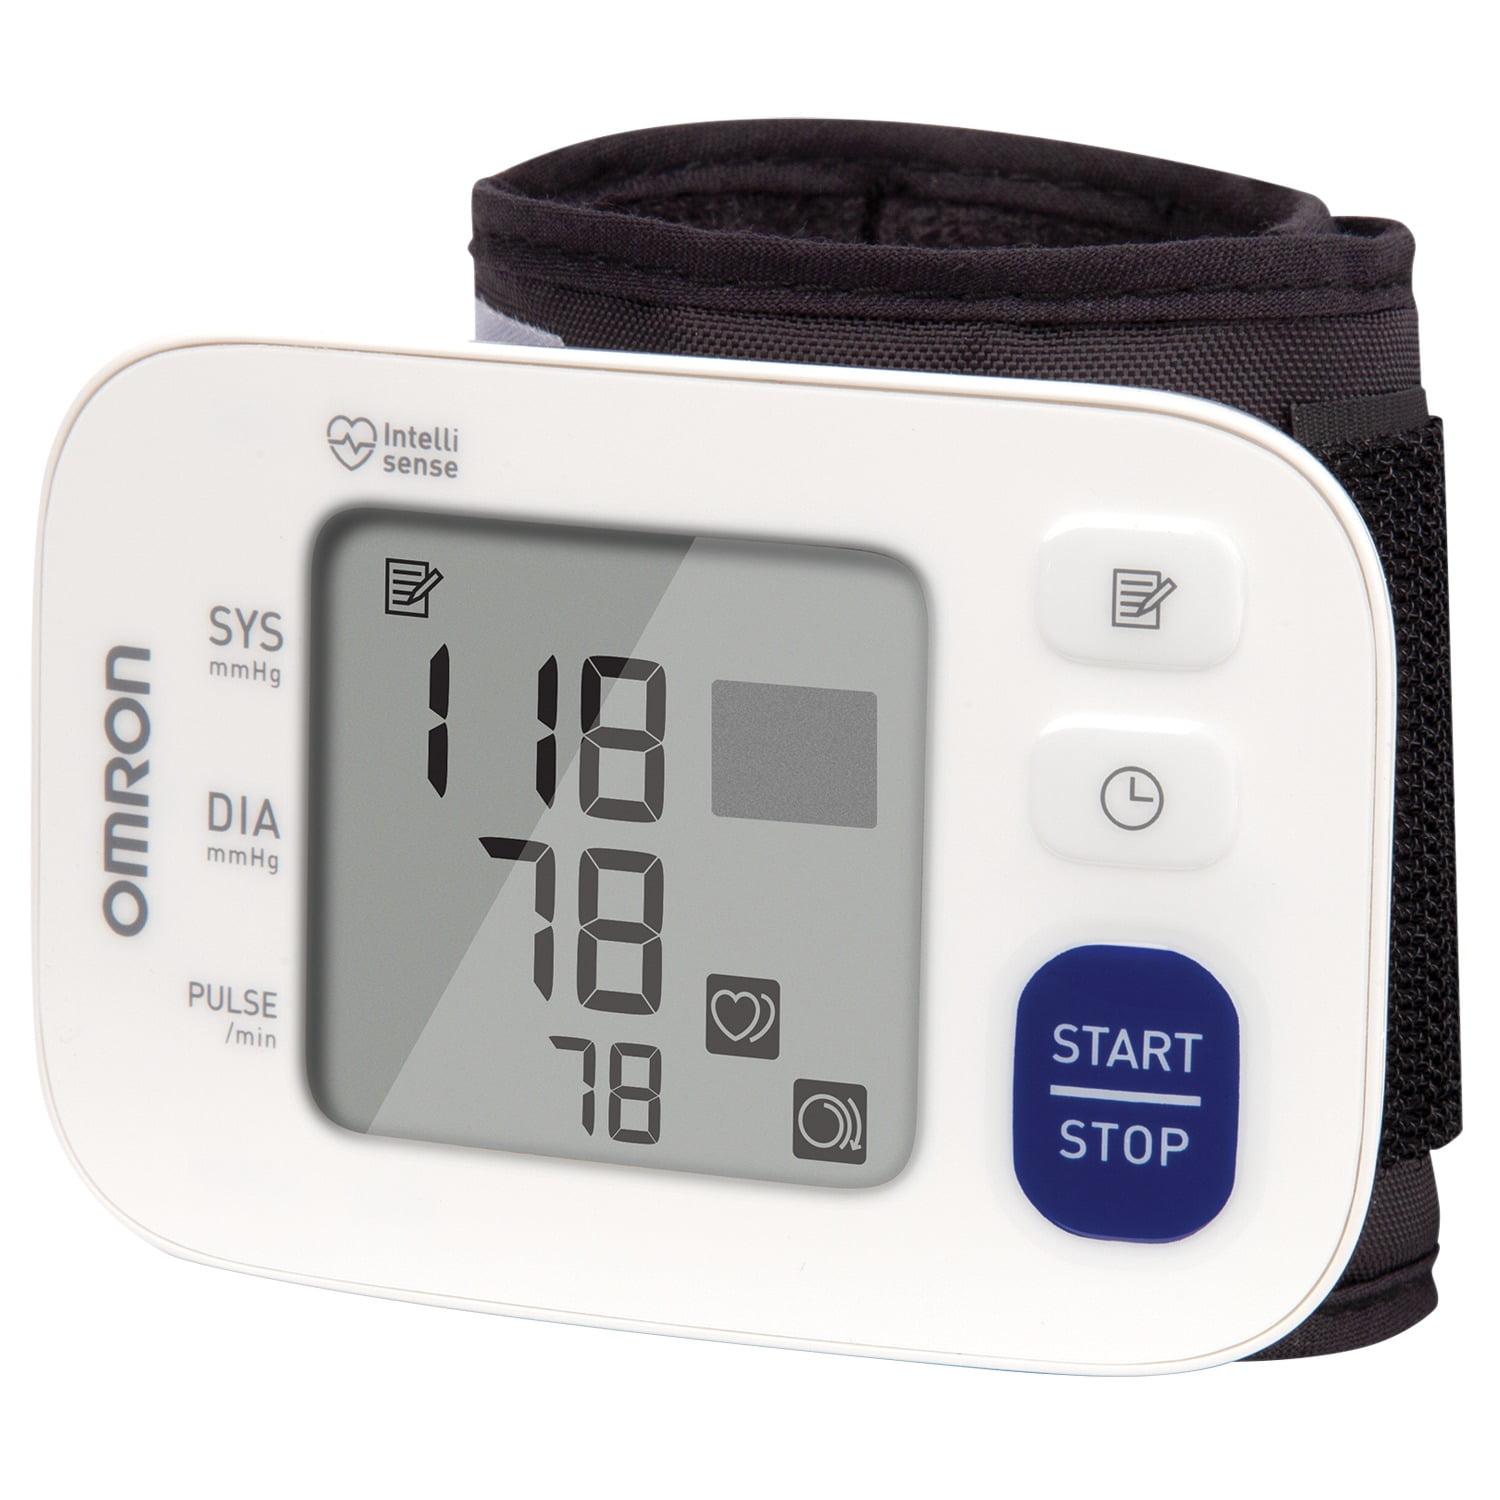 Omron blood pressure monitor - new never used - health and beauty